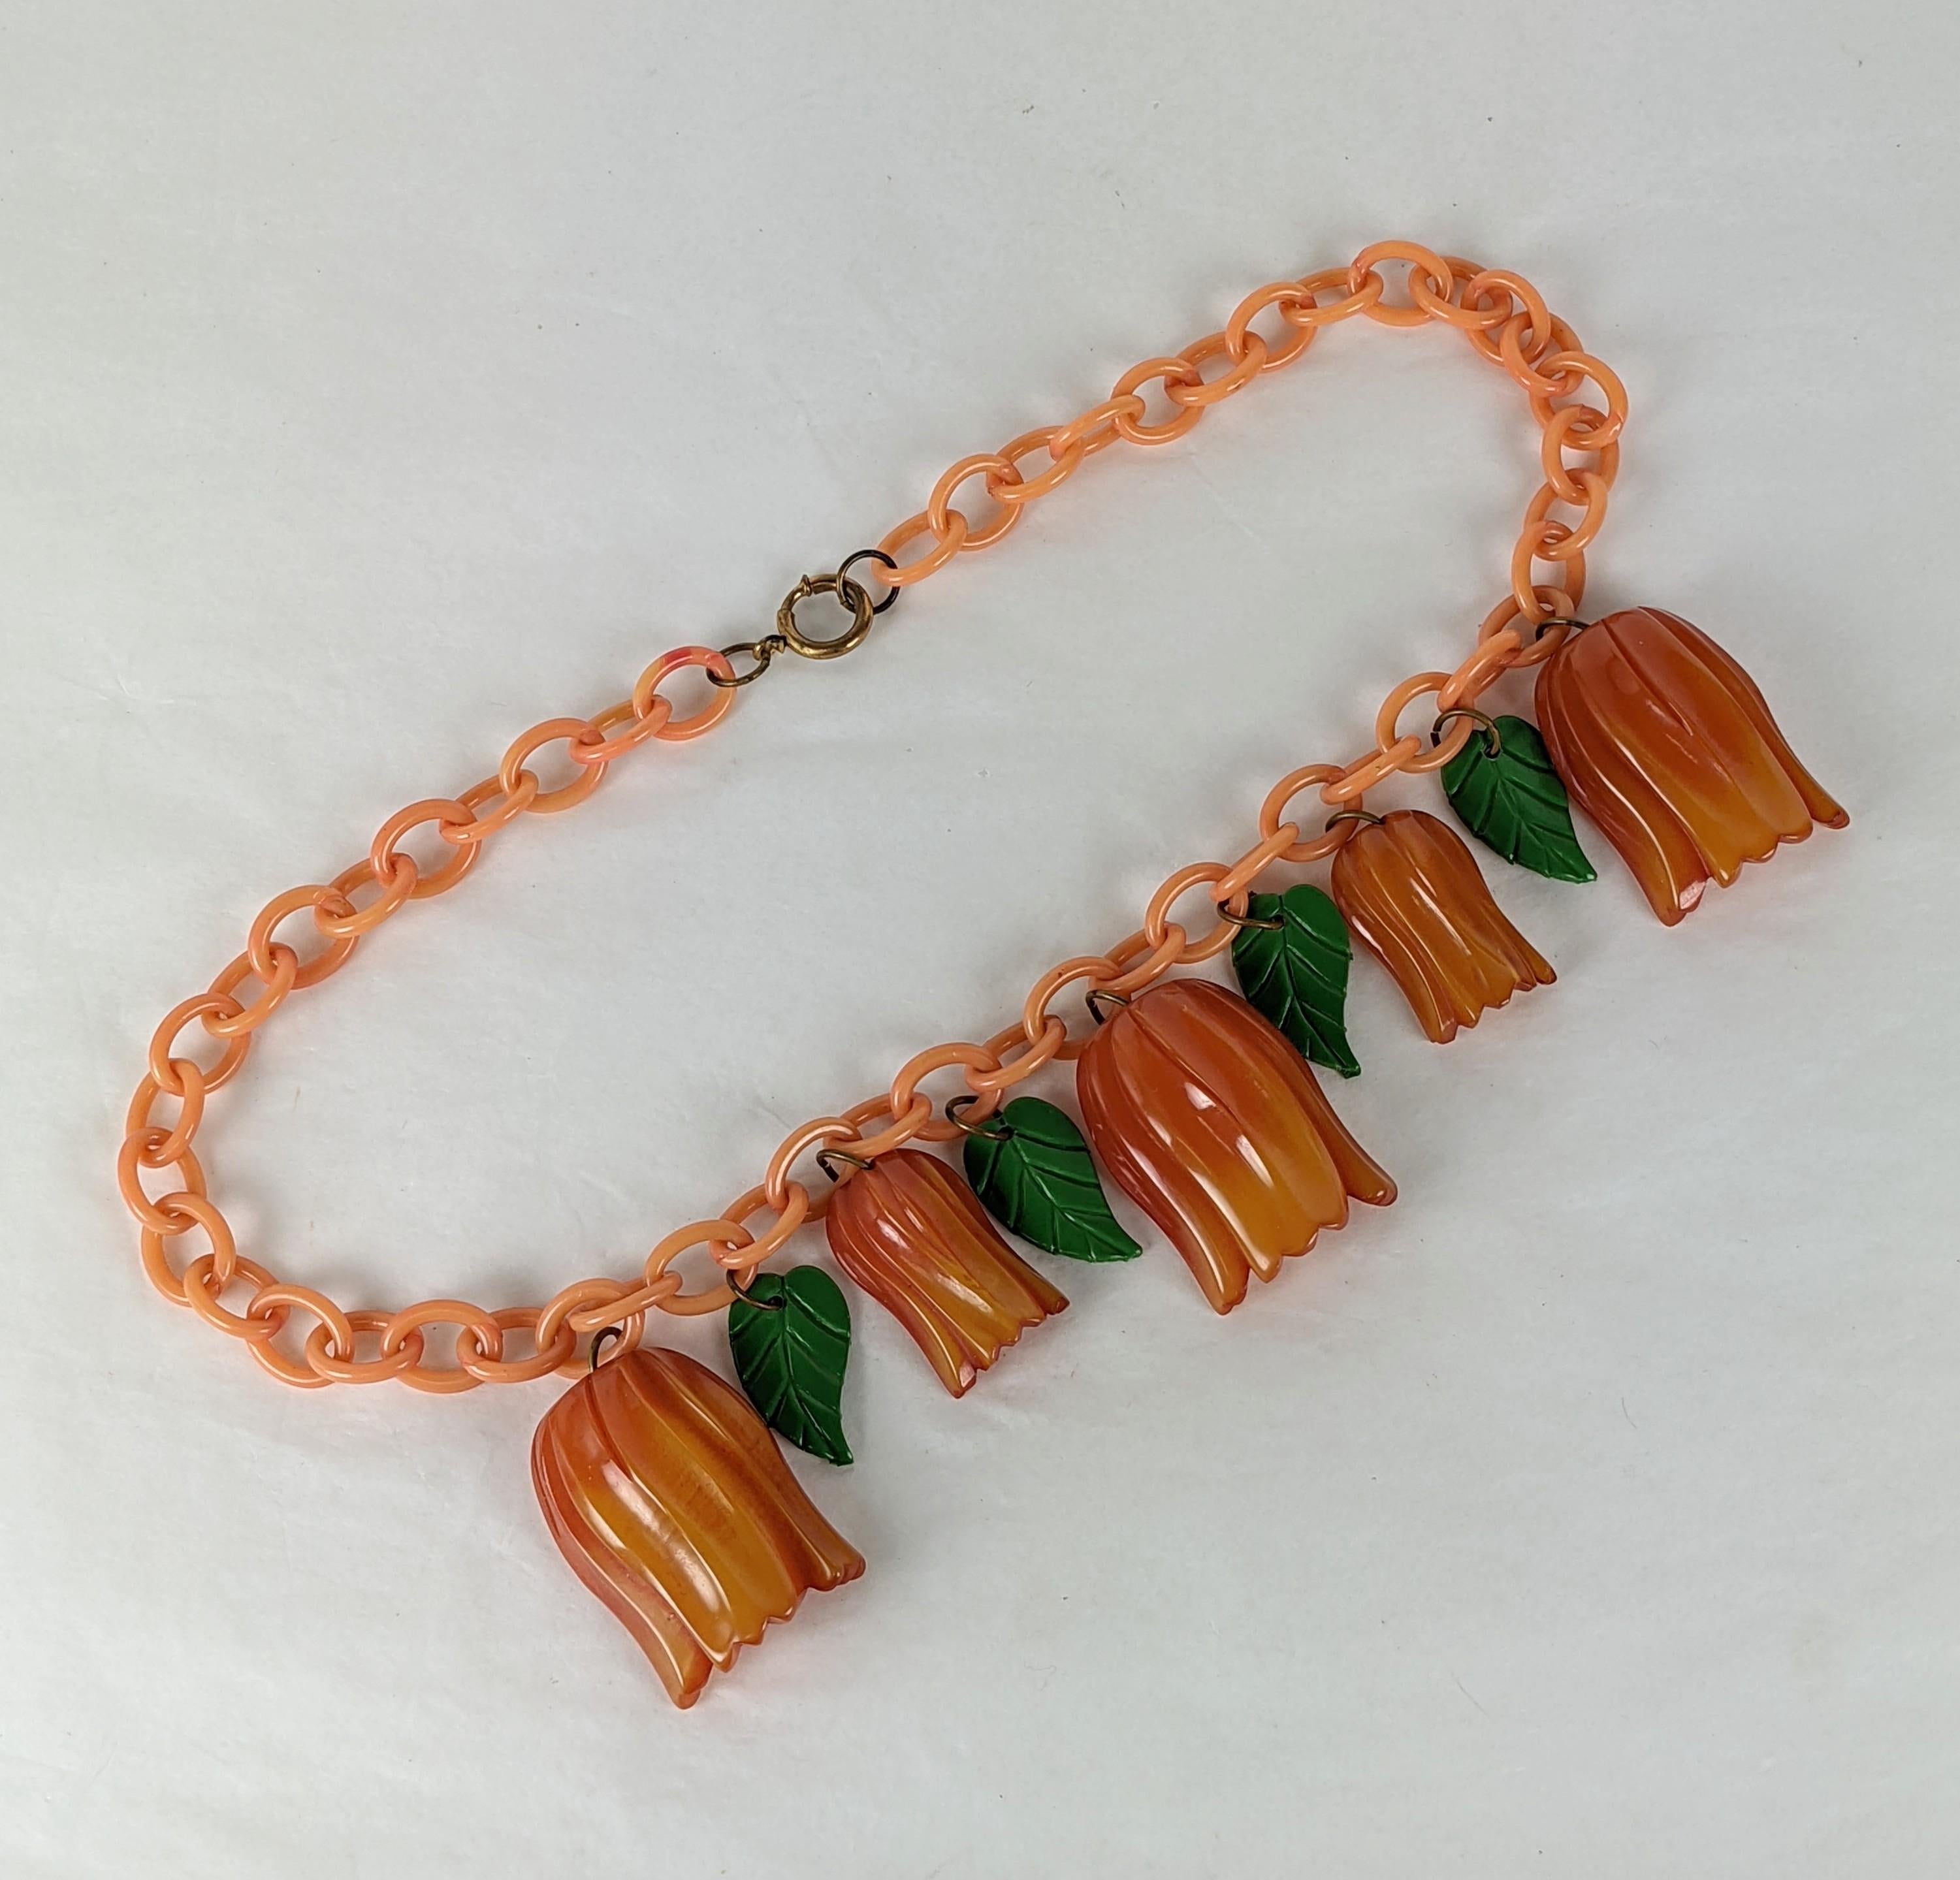 Wonderful Art Deco Bakelite Tulip Necklace In Excellent Condition For Sale In New York, NY